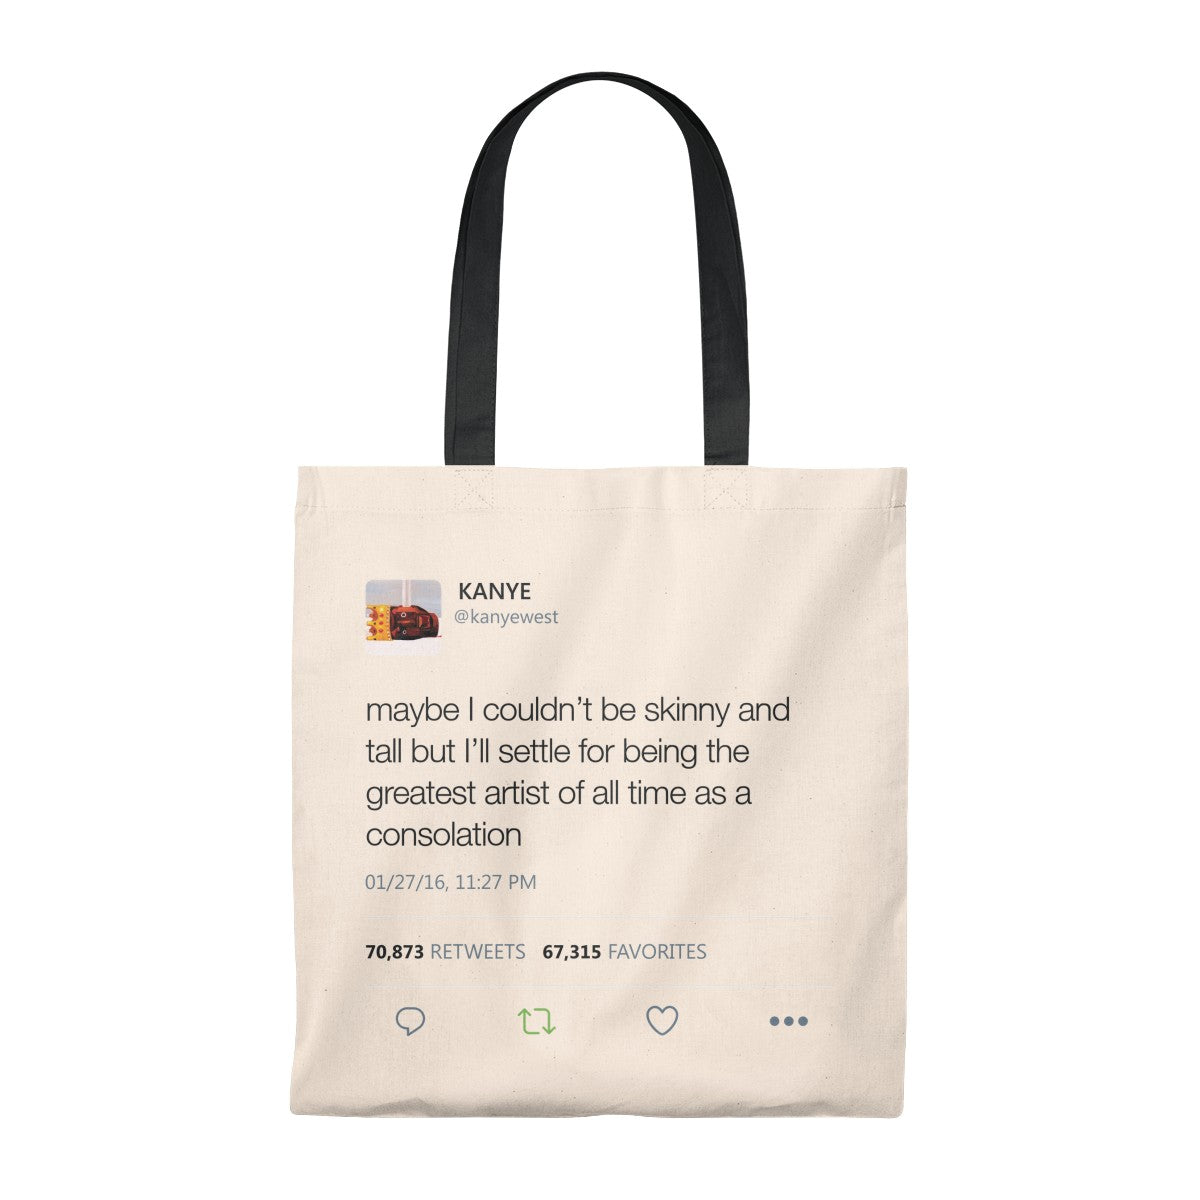 Maybe I Couldn't Be Skinny And Tall But I'll Settle For Being The Greatest Artist Of All Time.. Kanye West Tweet Tote Bag-Natural/Black-Archethype